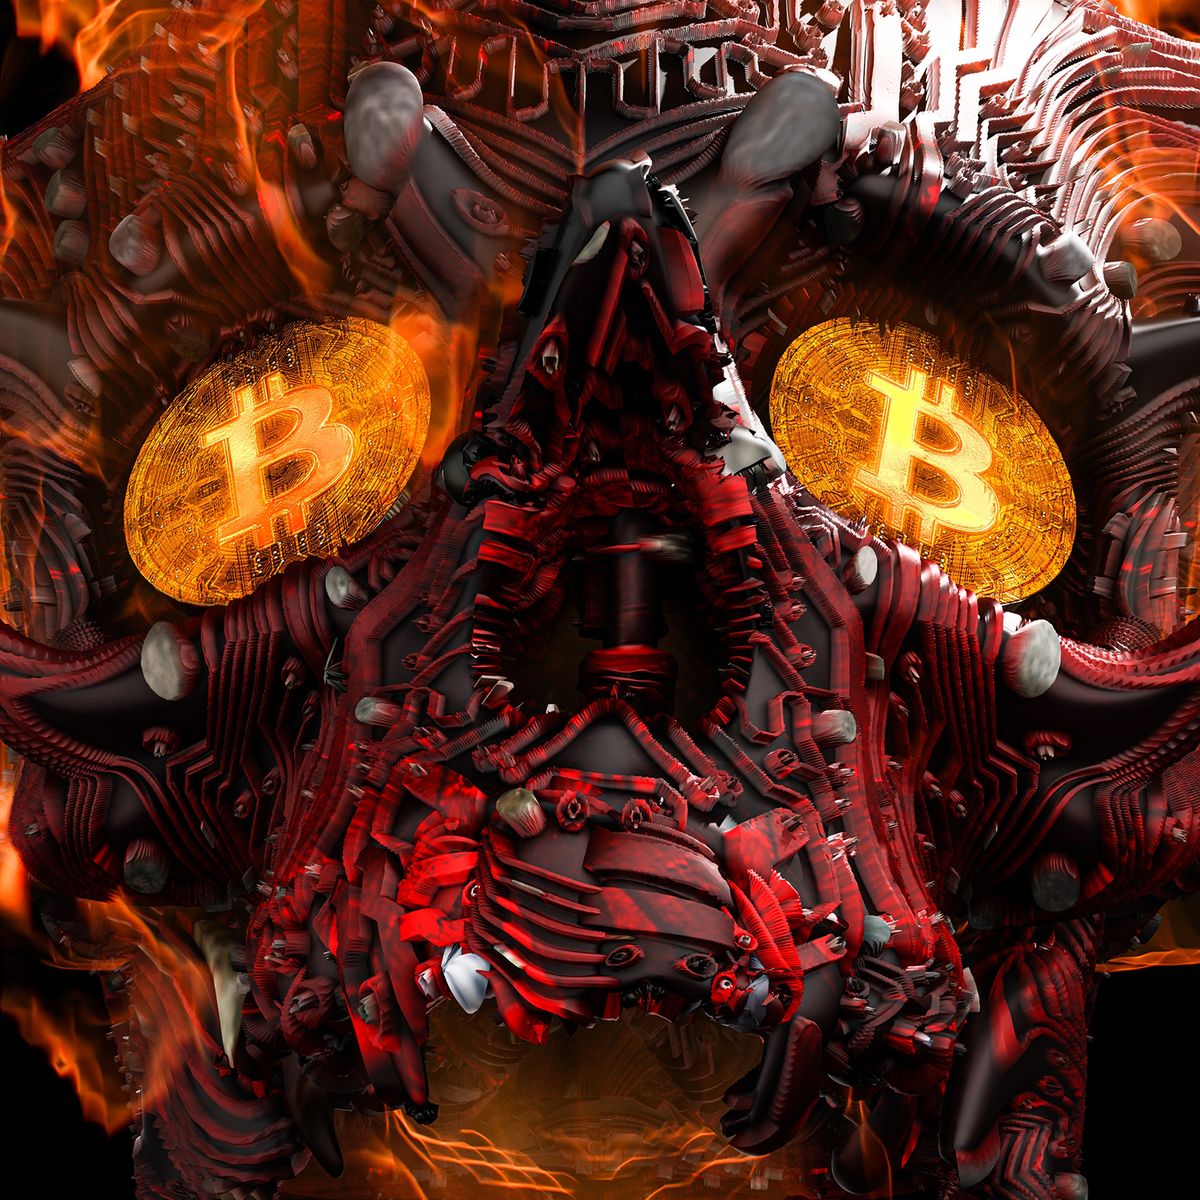 3d,Rendering,Of,A,Burning,Devil,Skull,With,Bitcoins,In
3D Rendering of a Burning  Devil Skull with Bitcoins in the Eye Sockets